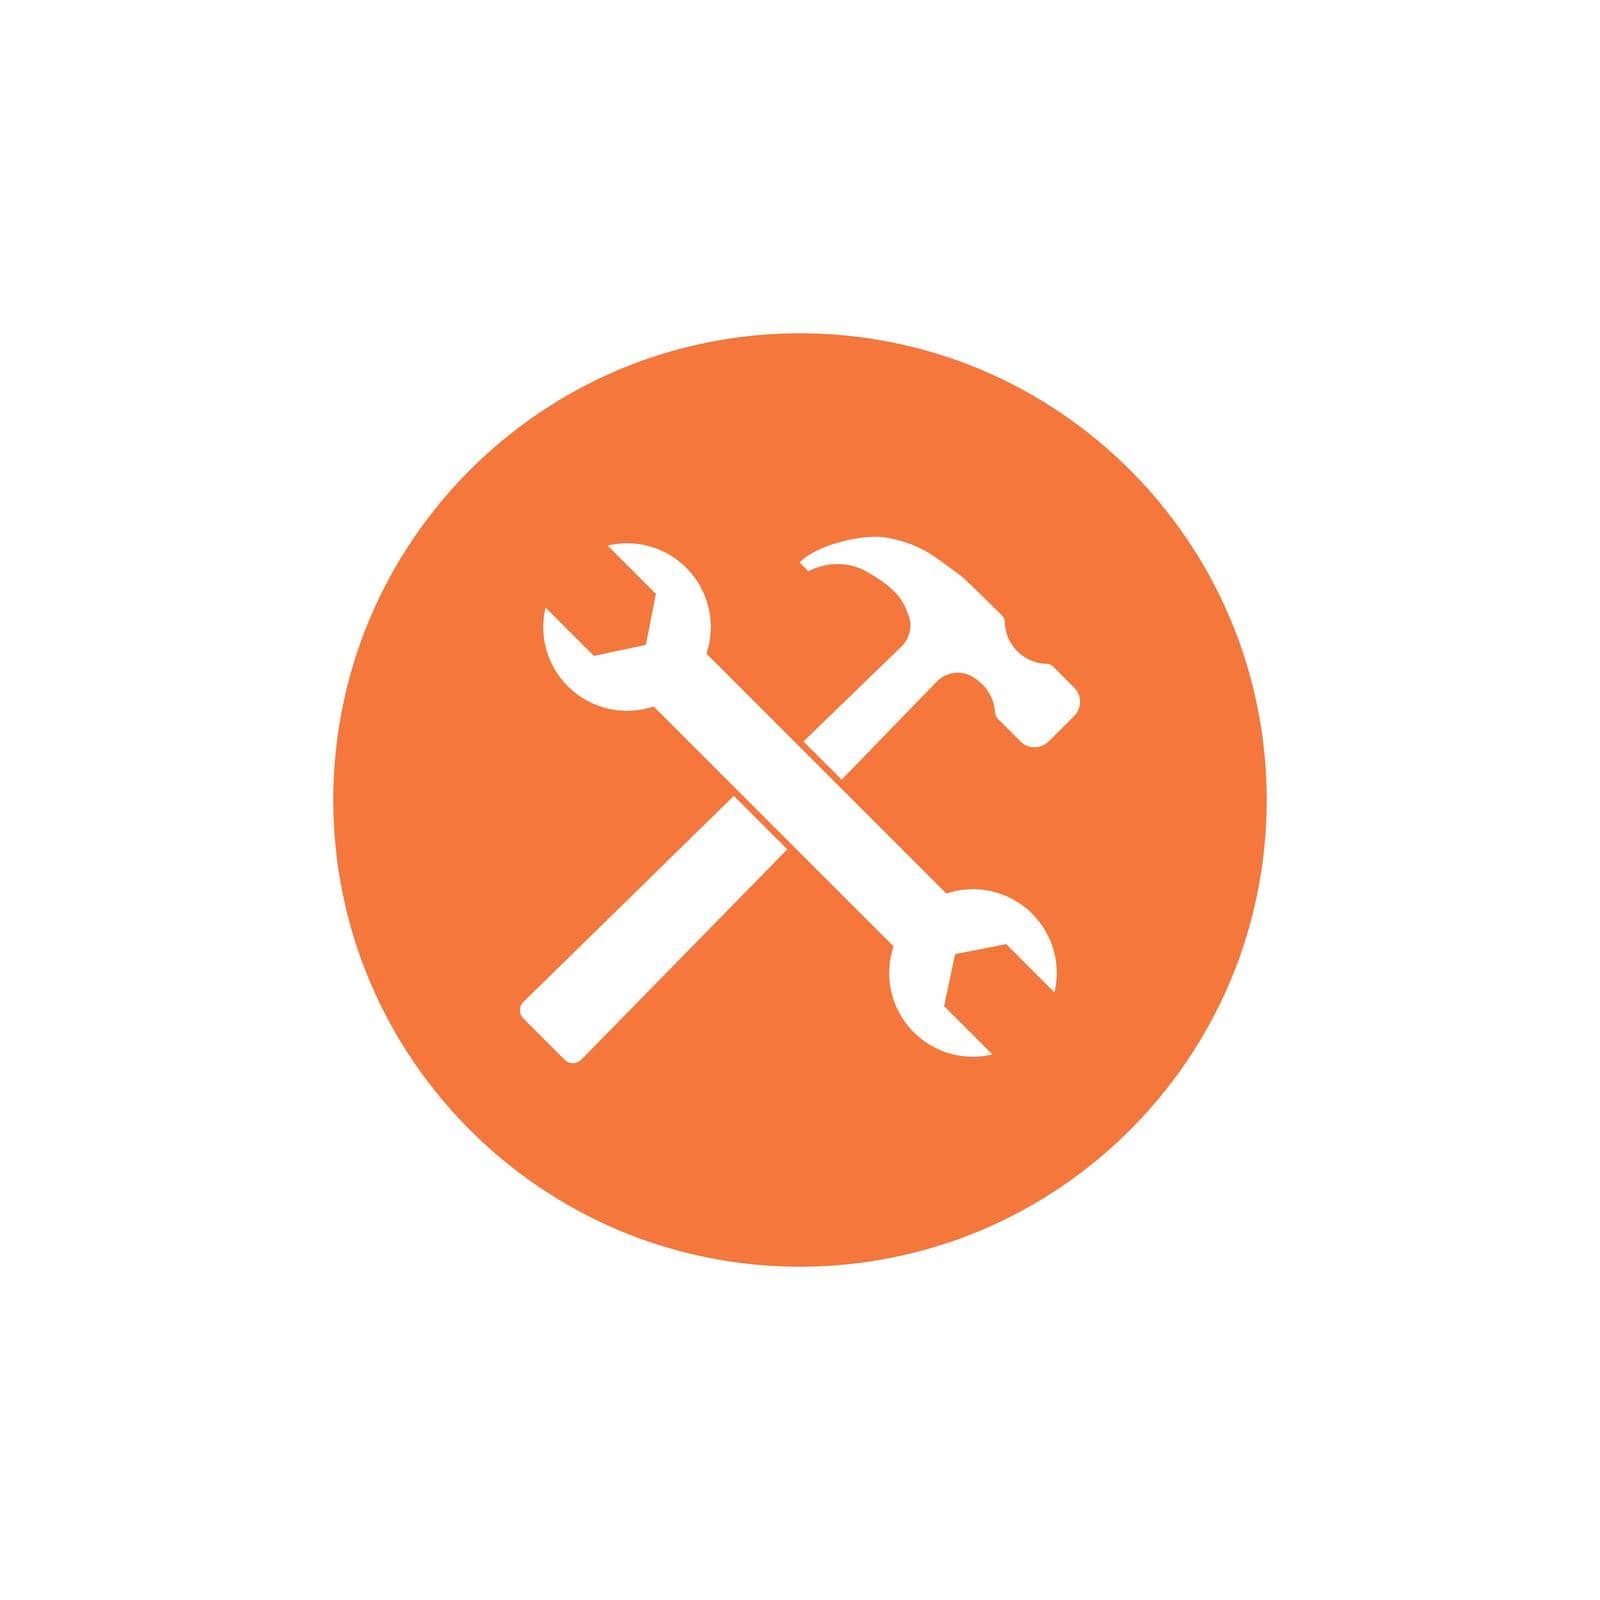 Hammer and wrench icon. Vector illustration, flat